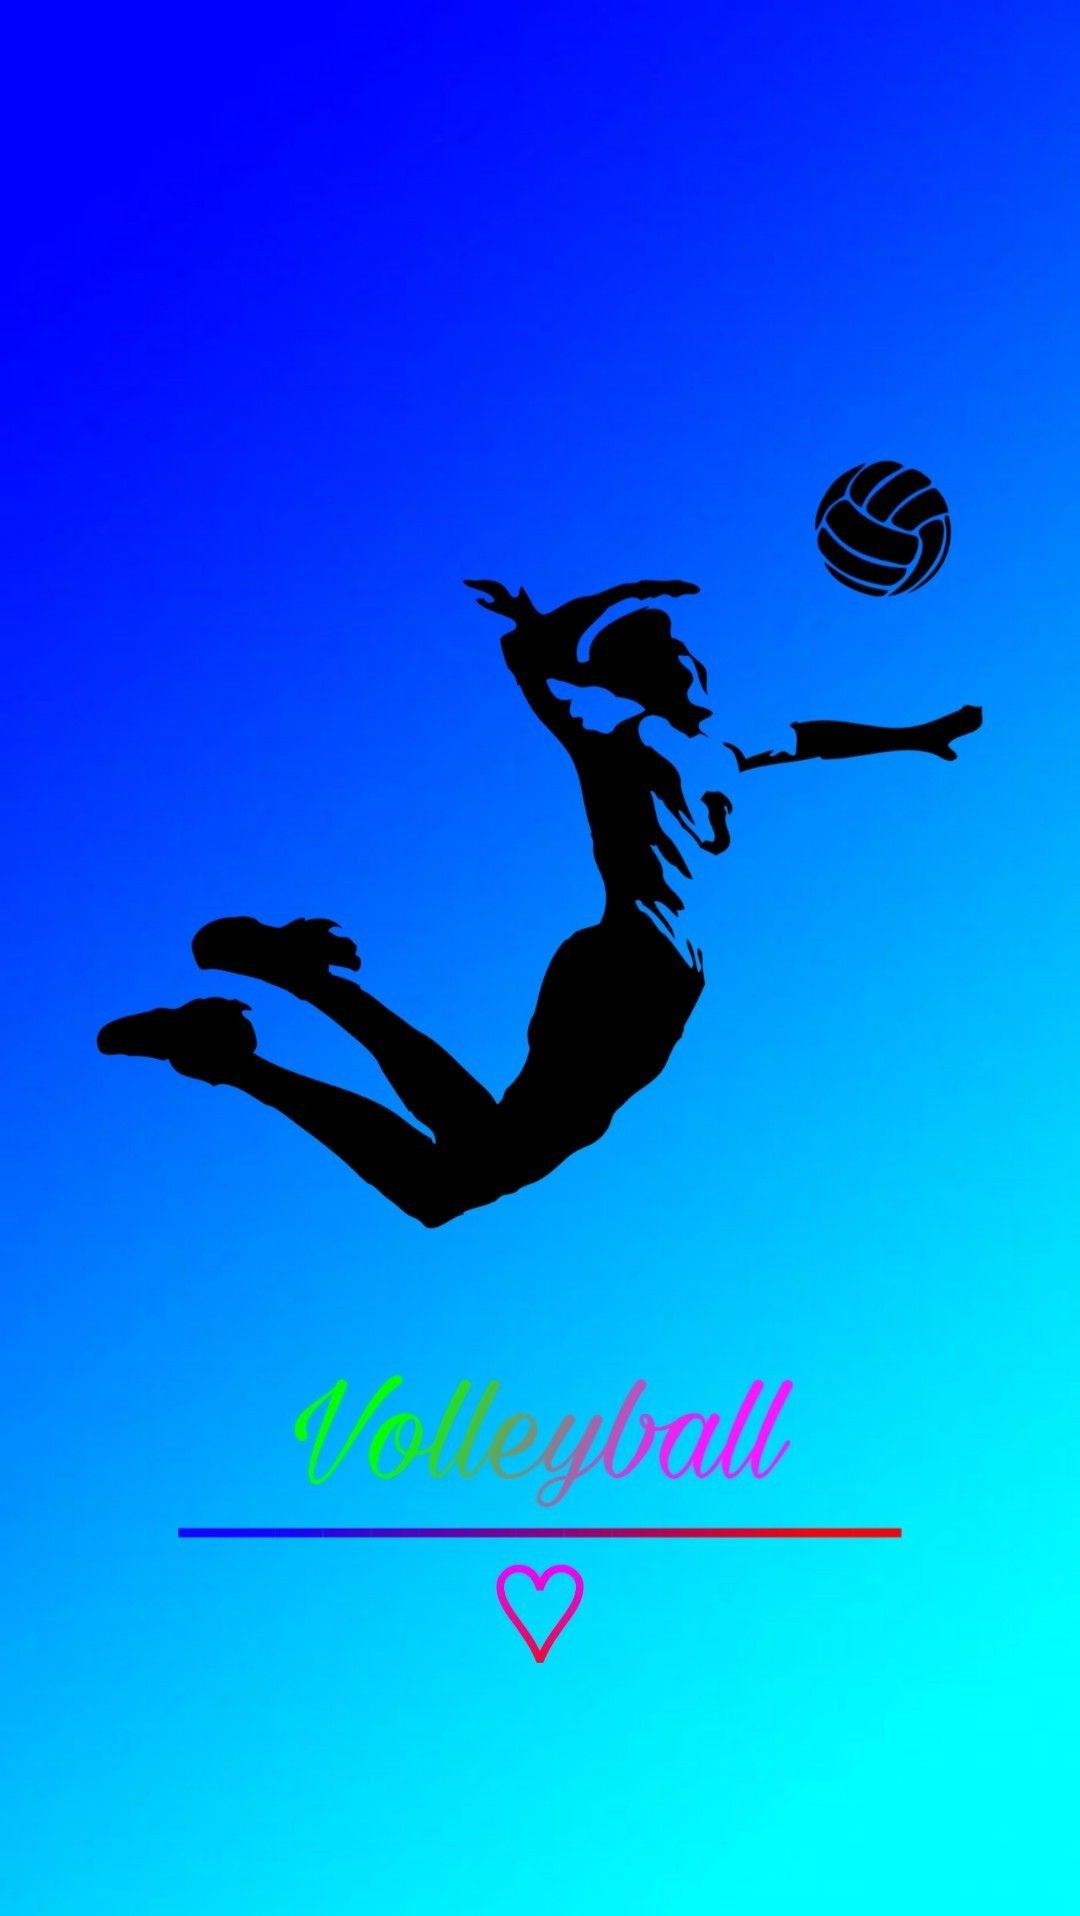 Volleyball Spike Silhouette Stock Illustrations – 187 Volleyball Spike  Silhouette Stock Illustrations, Vectors & Clipart - Dreamstime